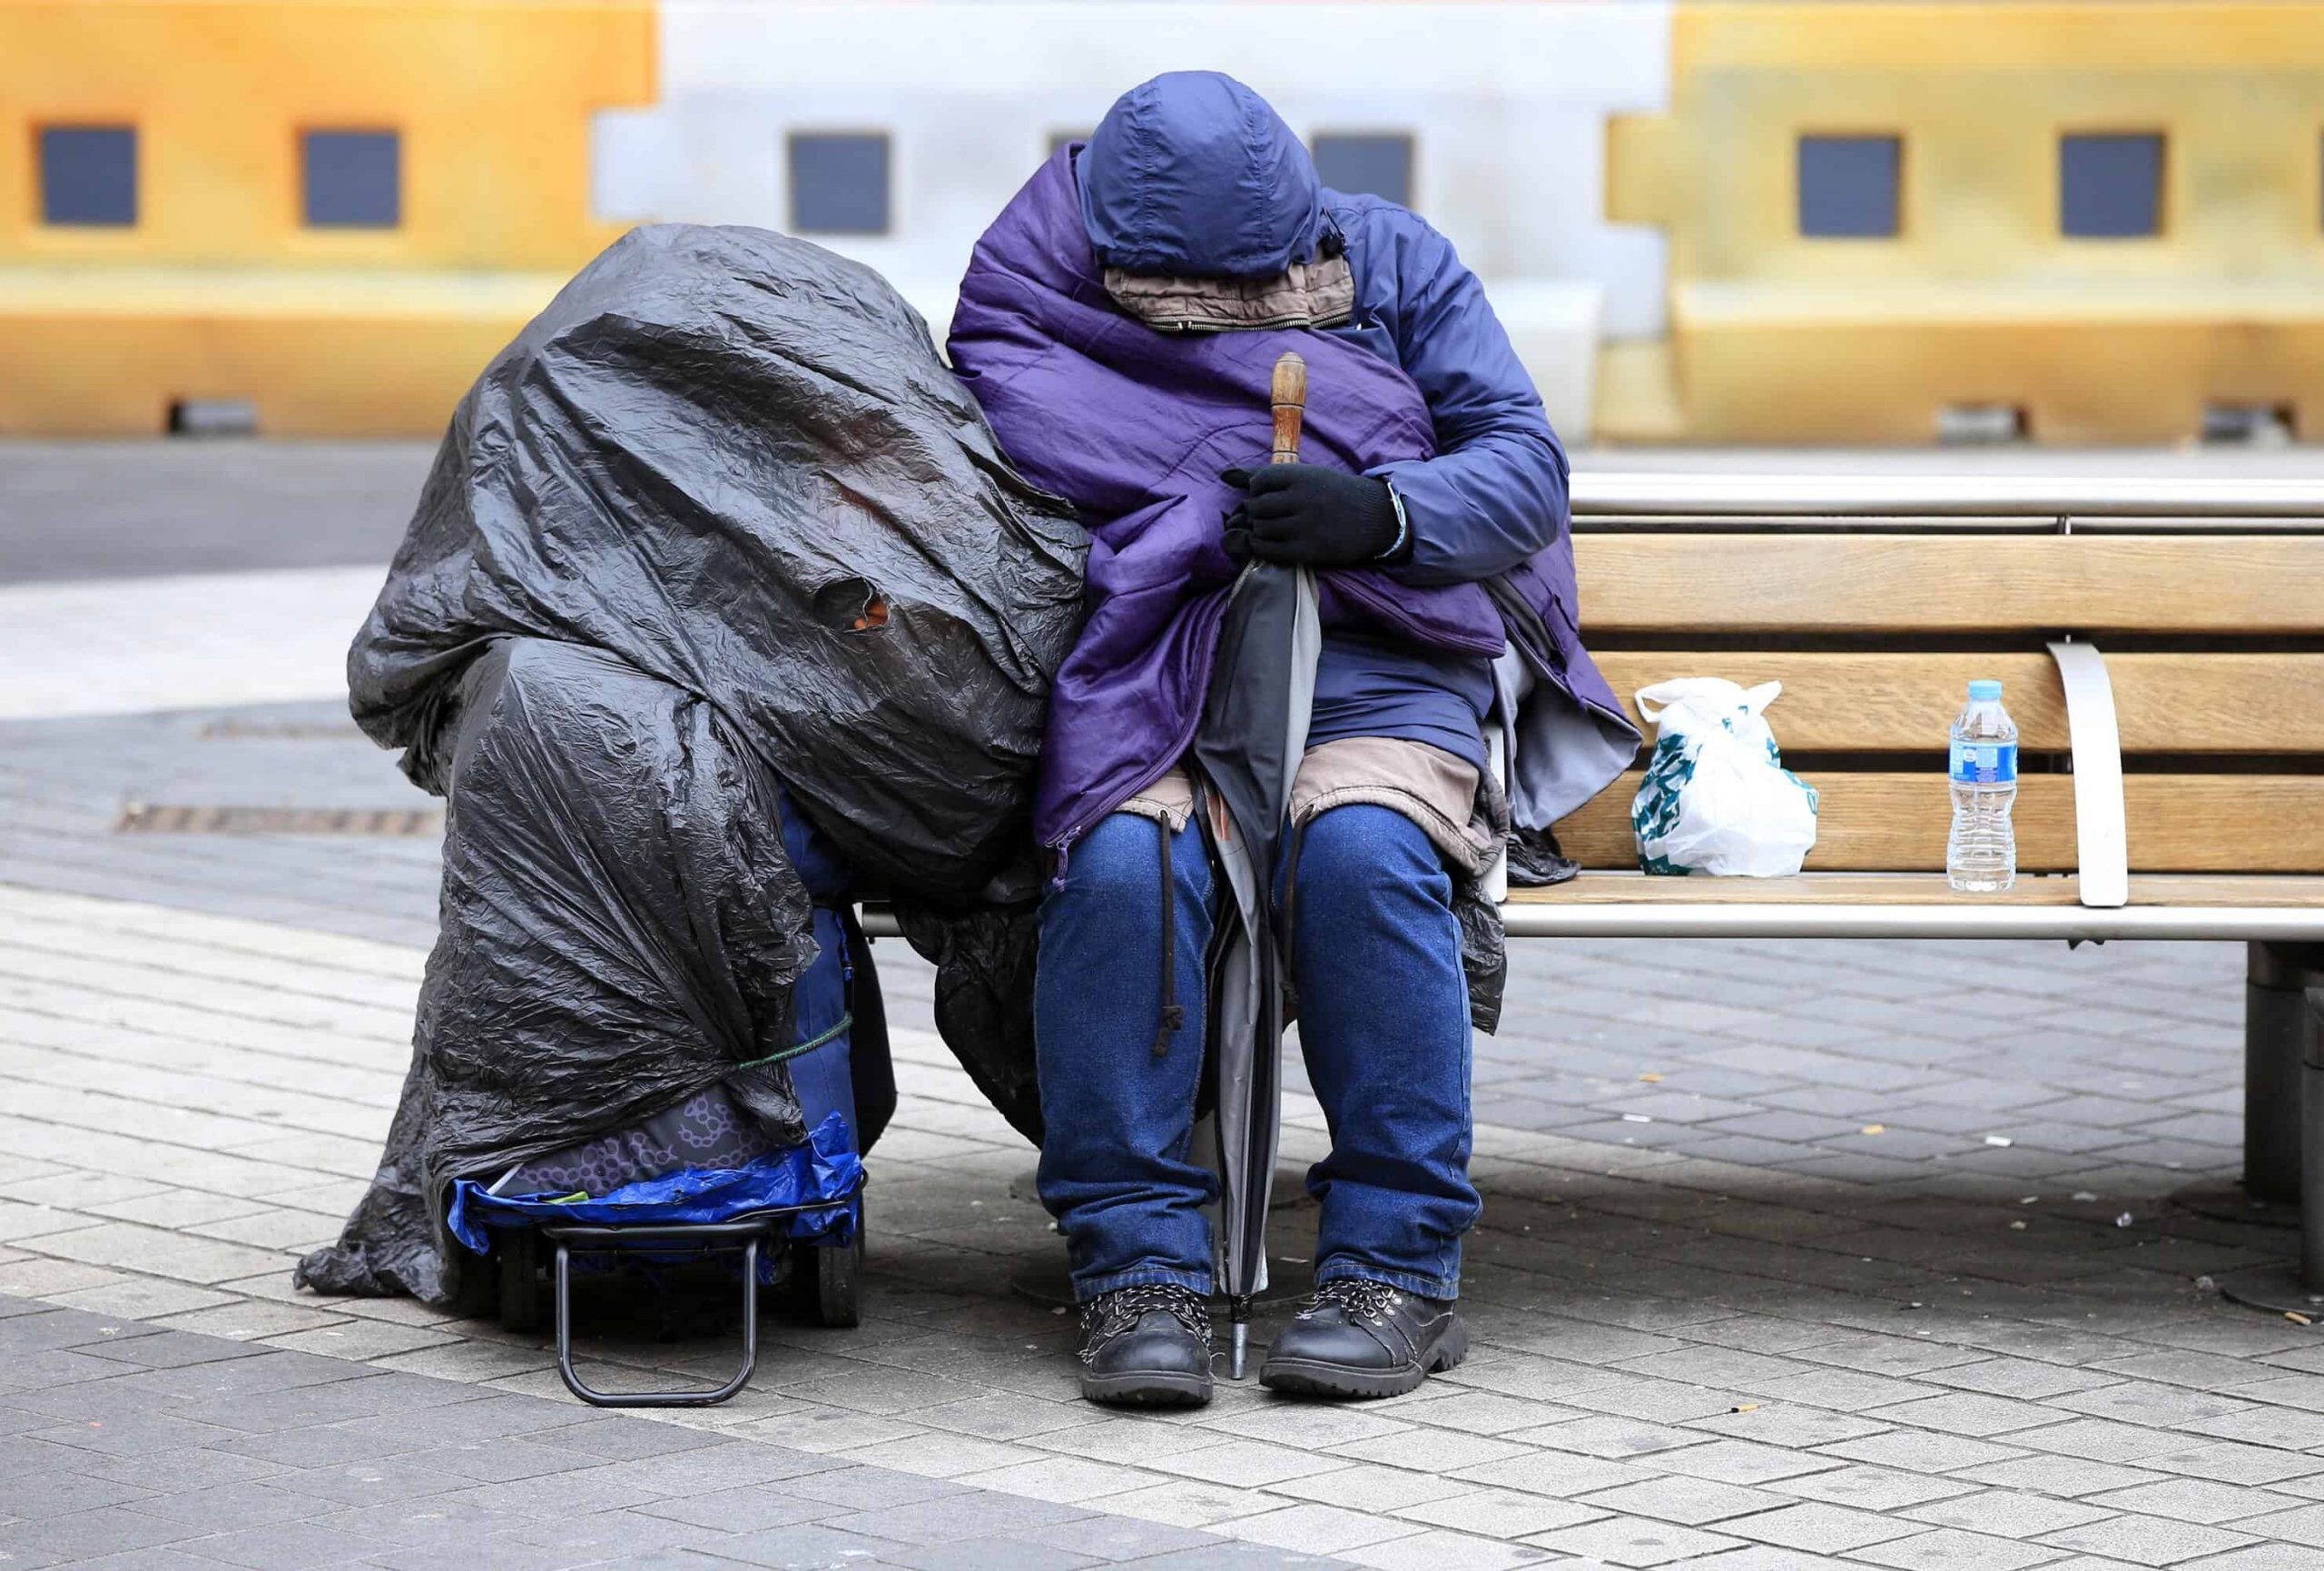 Number of people forced to sleep rough doubles in 5 years